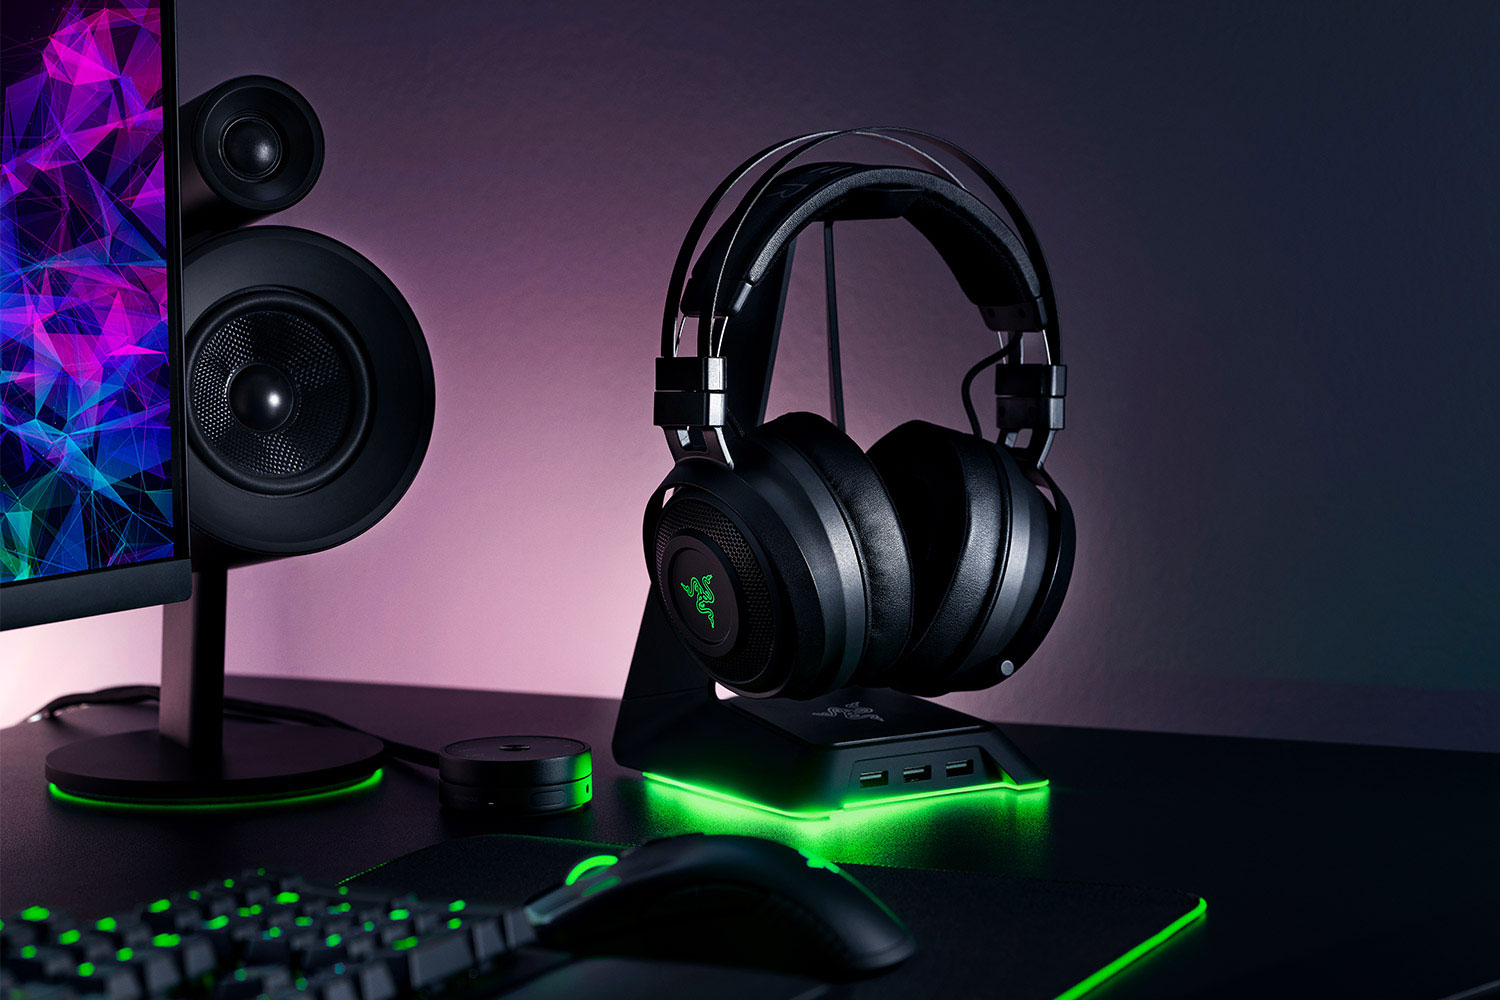 Modern Do Headphones Make A Difference In Gaming for Streamer